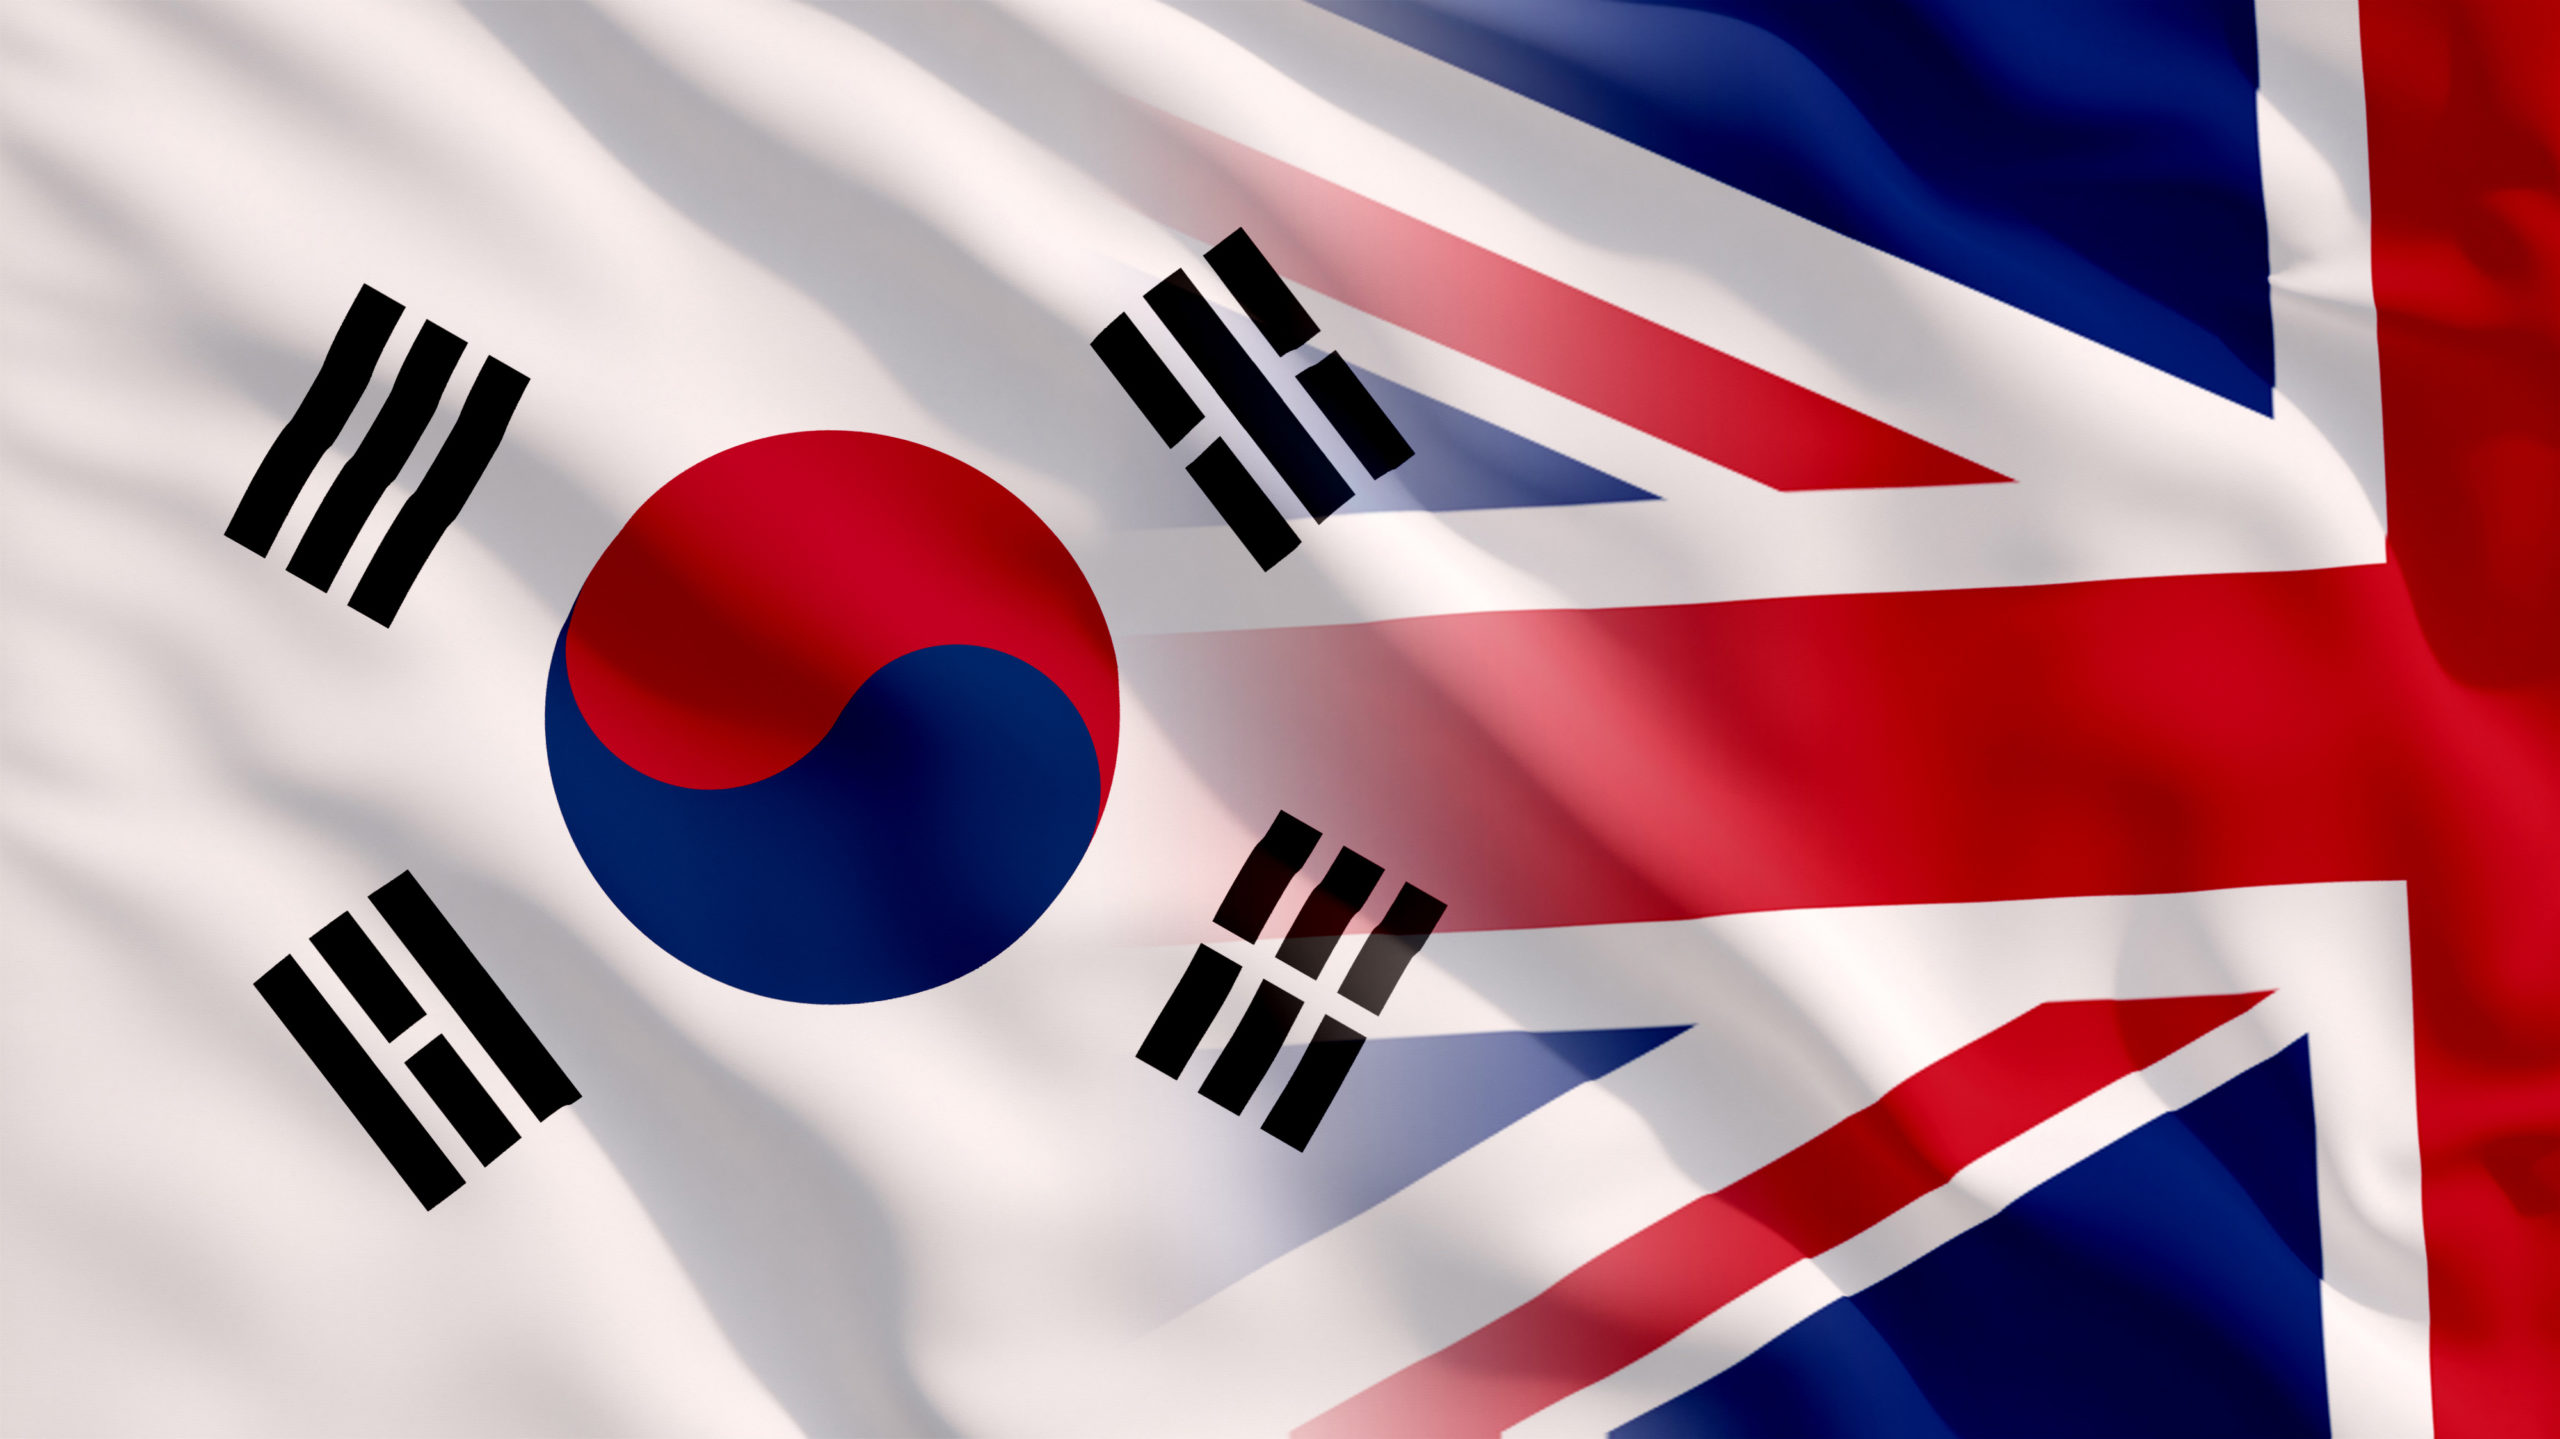 Follow Innovate UK on the latest Global Expert Mission in Semiconductors to South Korea